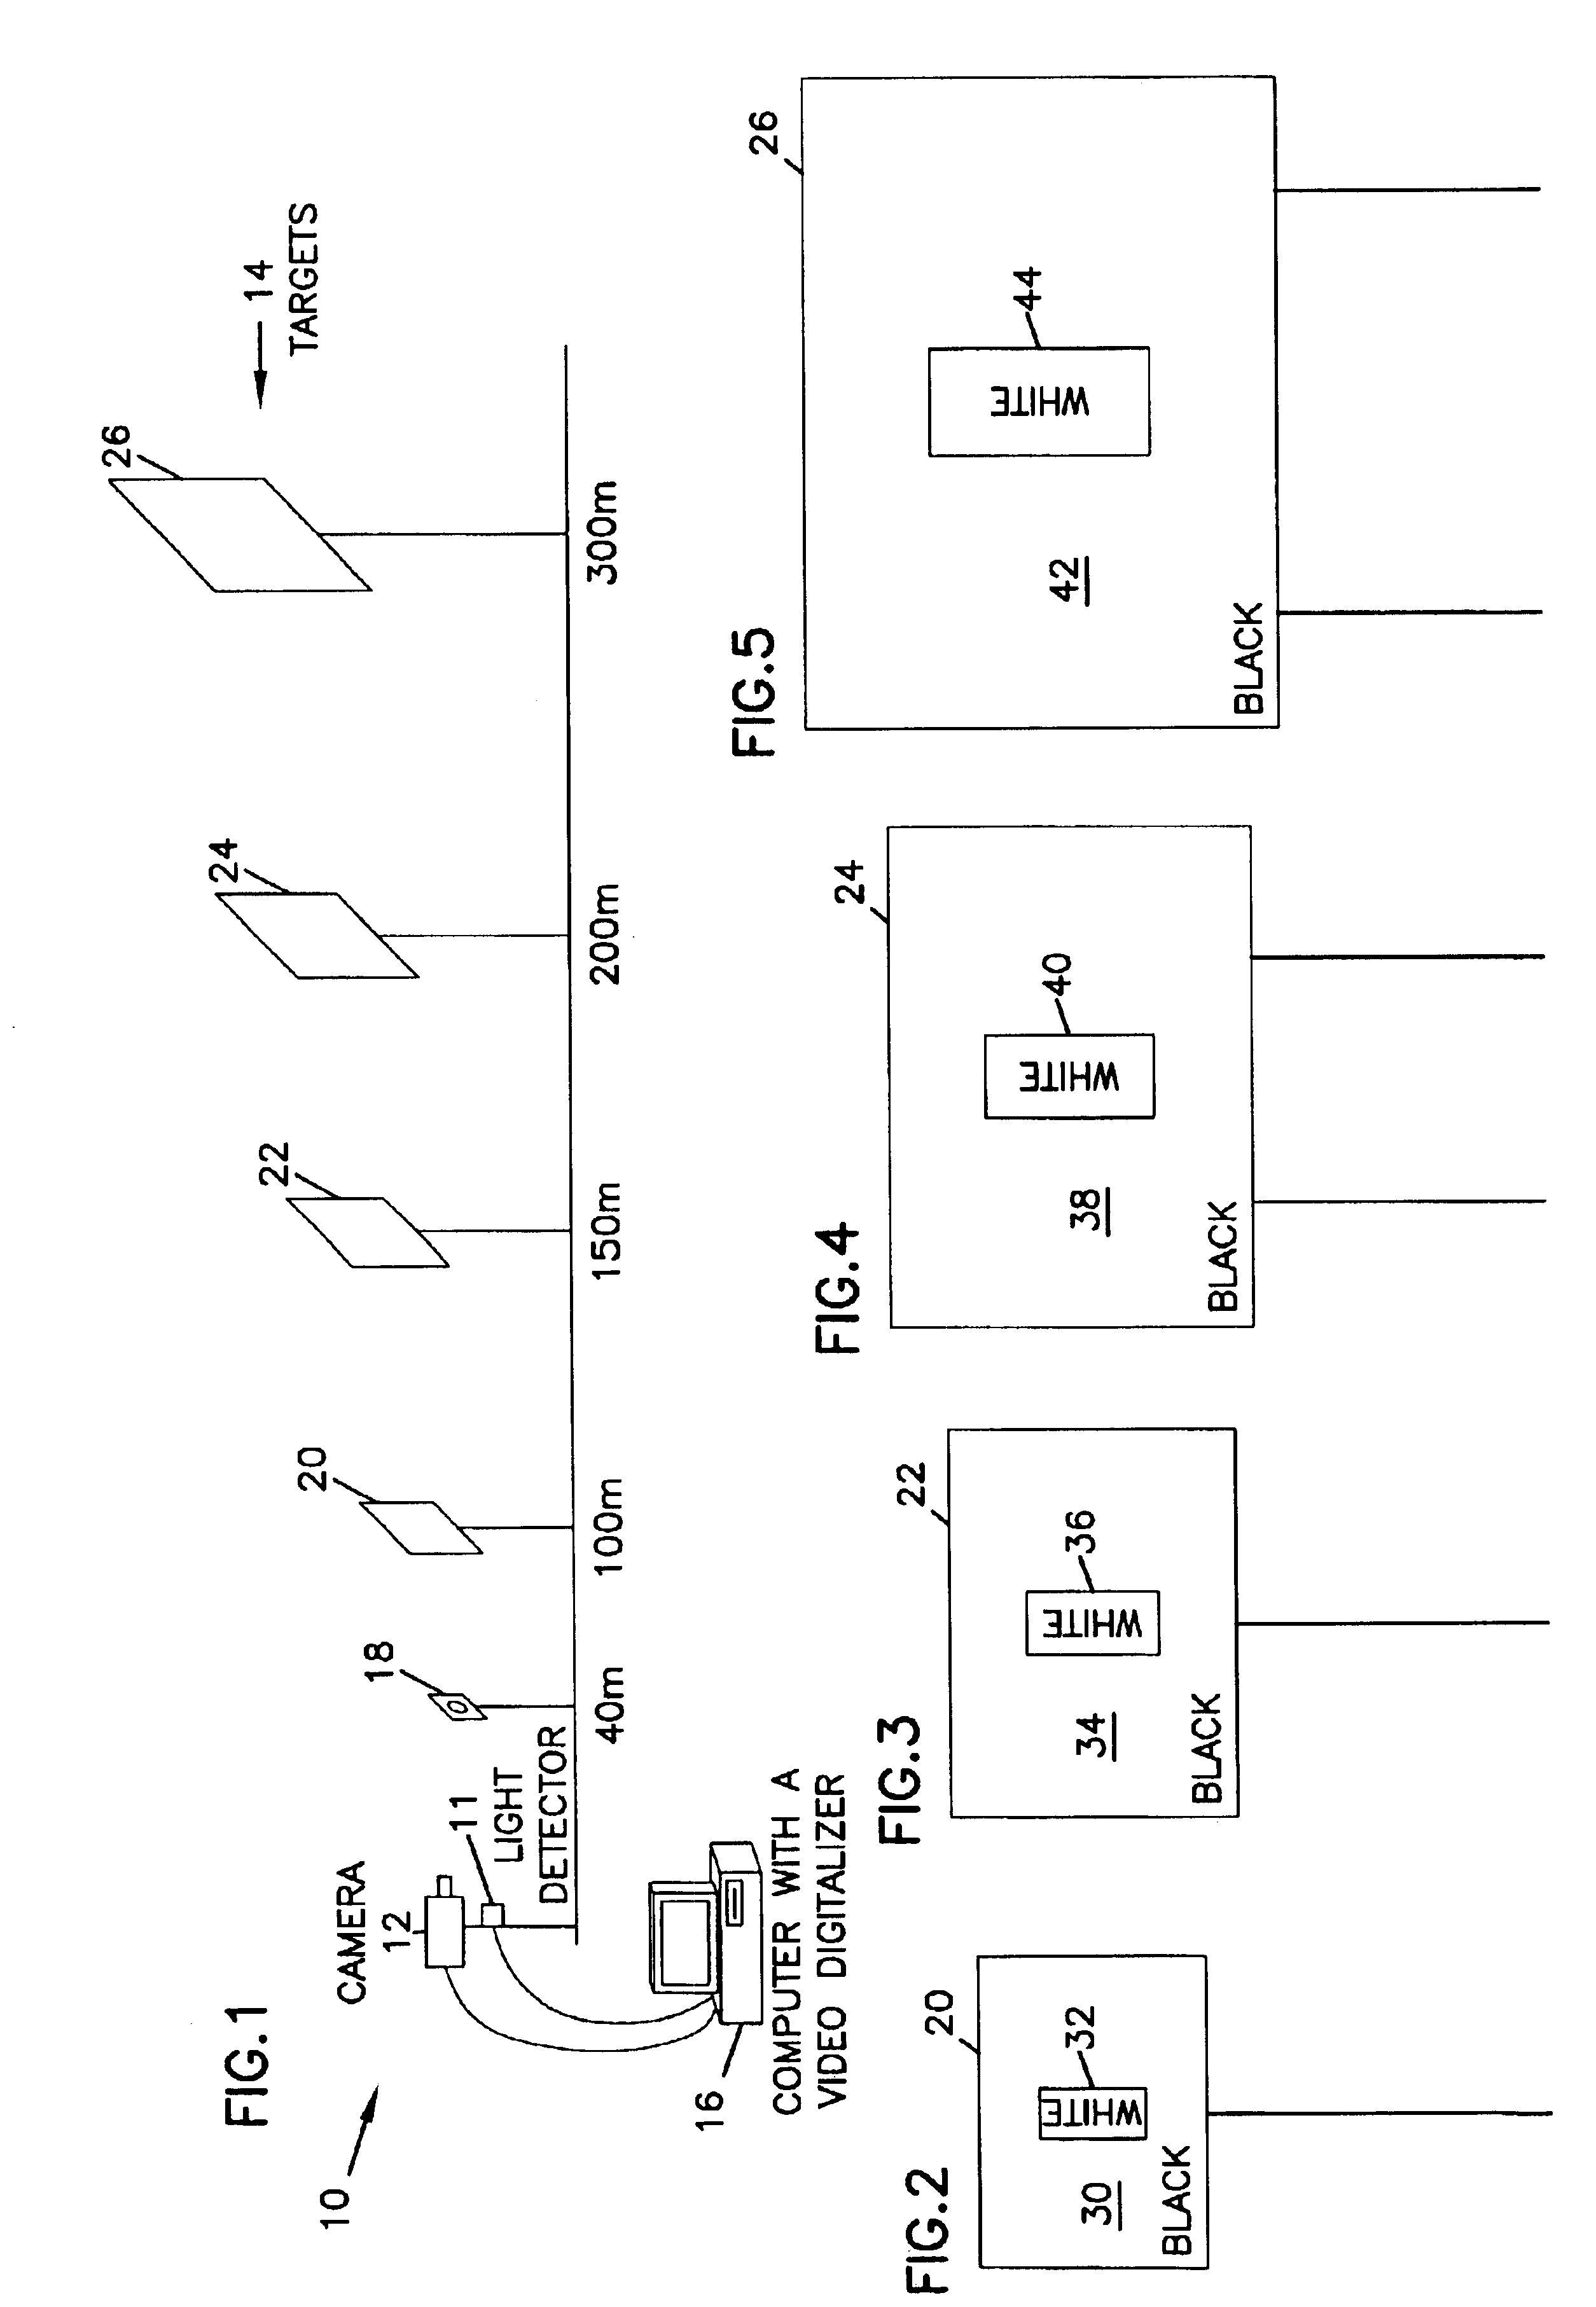 Video camera-based visibility measurement system